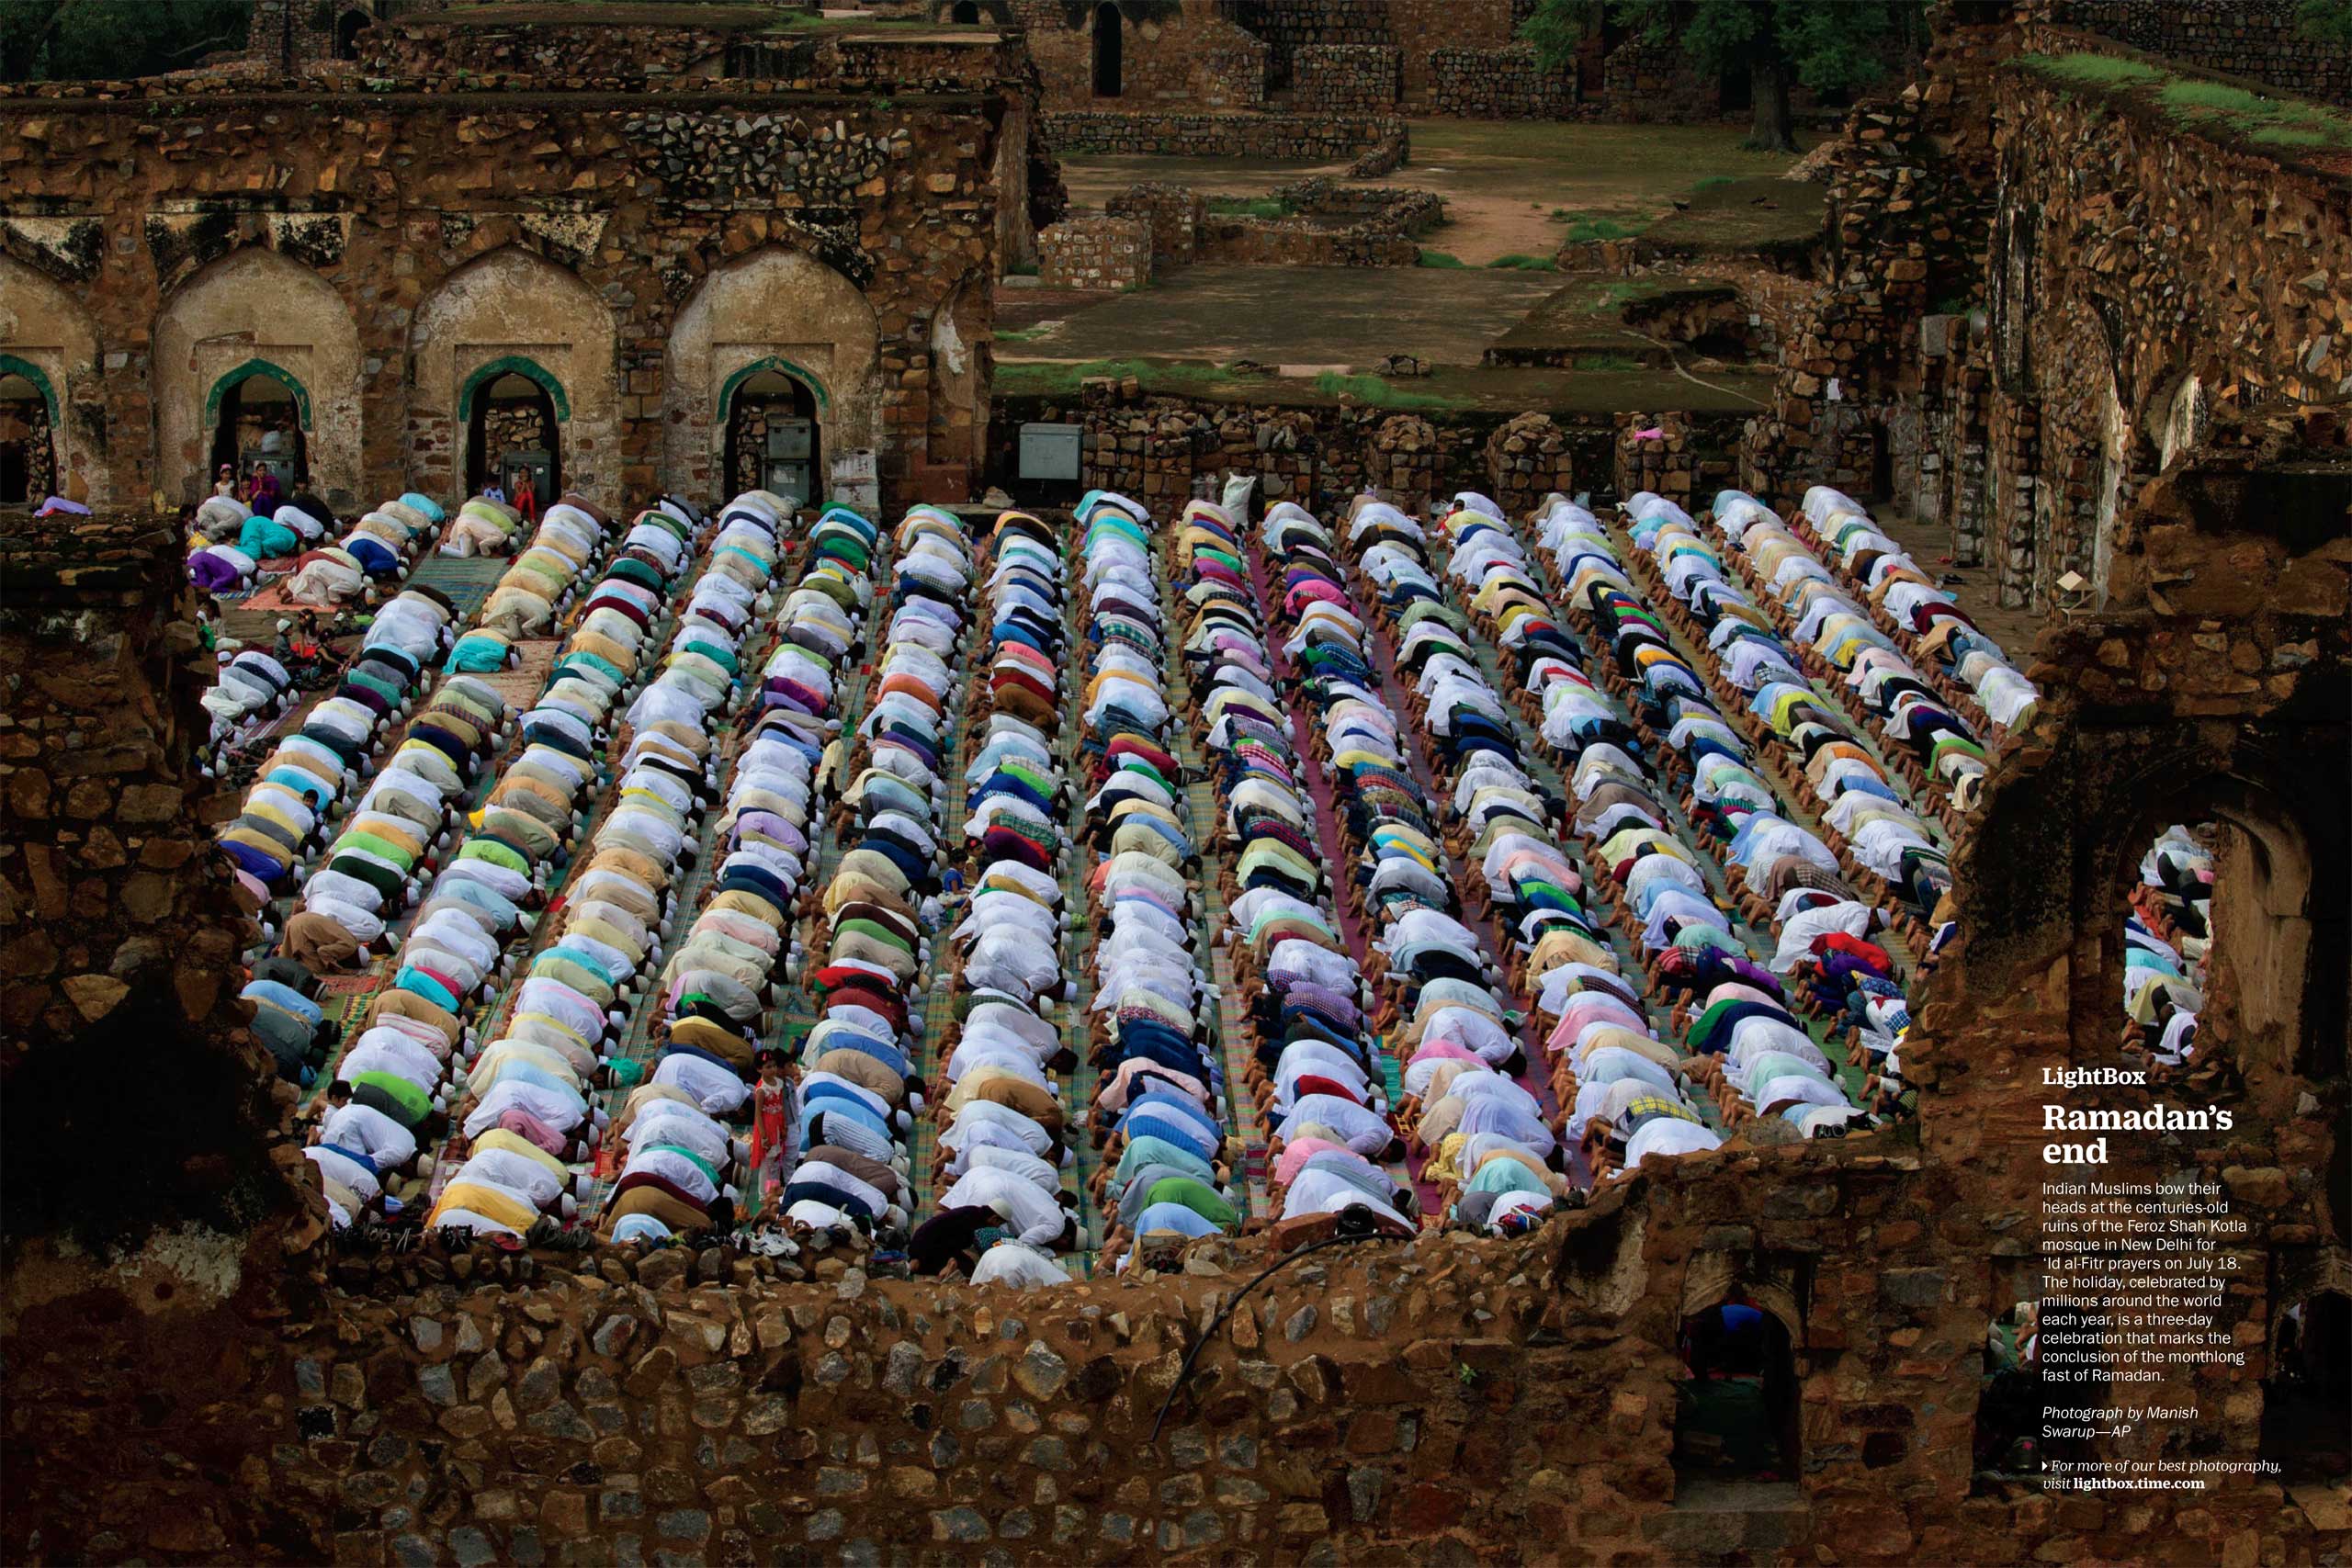 Photograph by Manish Swarup—APIndian Muslims bow their heads at the centuries-old ruins of the Feroz Shah Kotla mosque in New Delhi for 'Id al-Fitr prayers on July 18. The holiday, celebrated by millions around the world each year, is a three-day celebration that marks the conclusion of the monthlong fast of Ramadan. (TIME issue August 3, 2015)